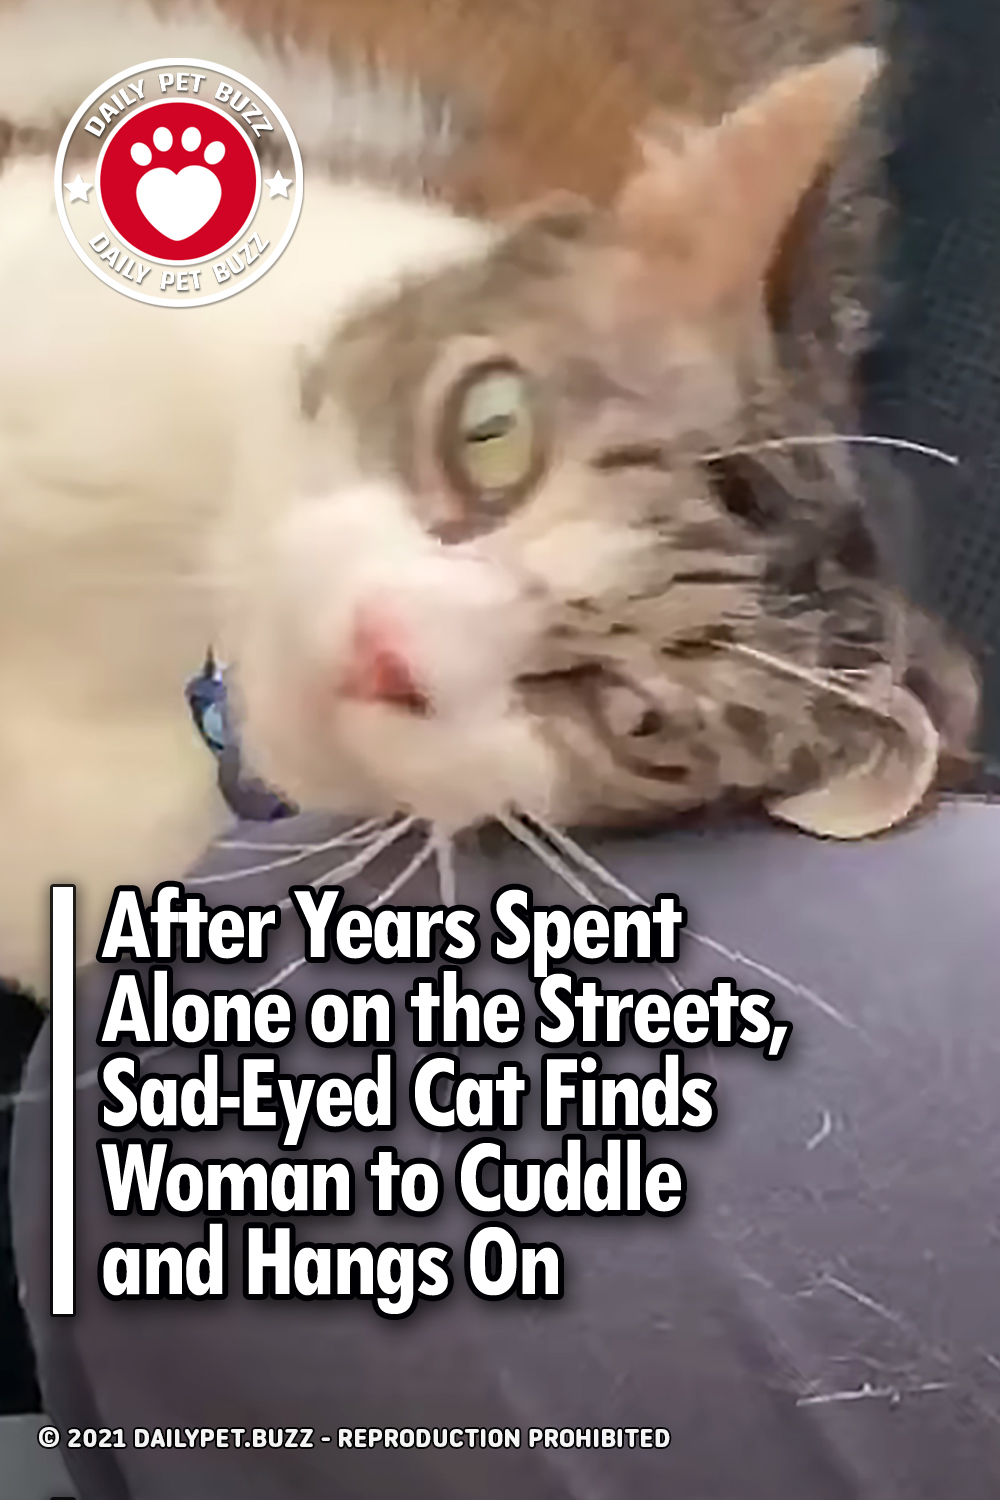 After Years Spent Alone on the Streets, Sad-Eyed Cat Finds Woman to Cuddle and Hangs On